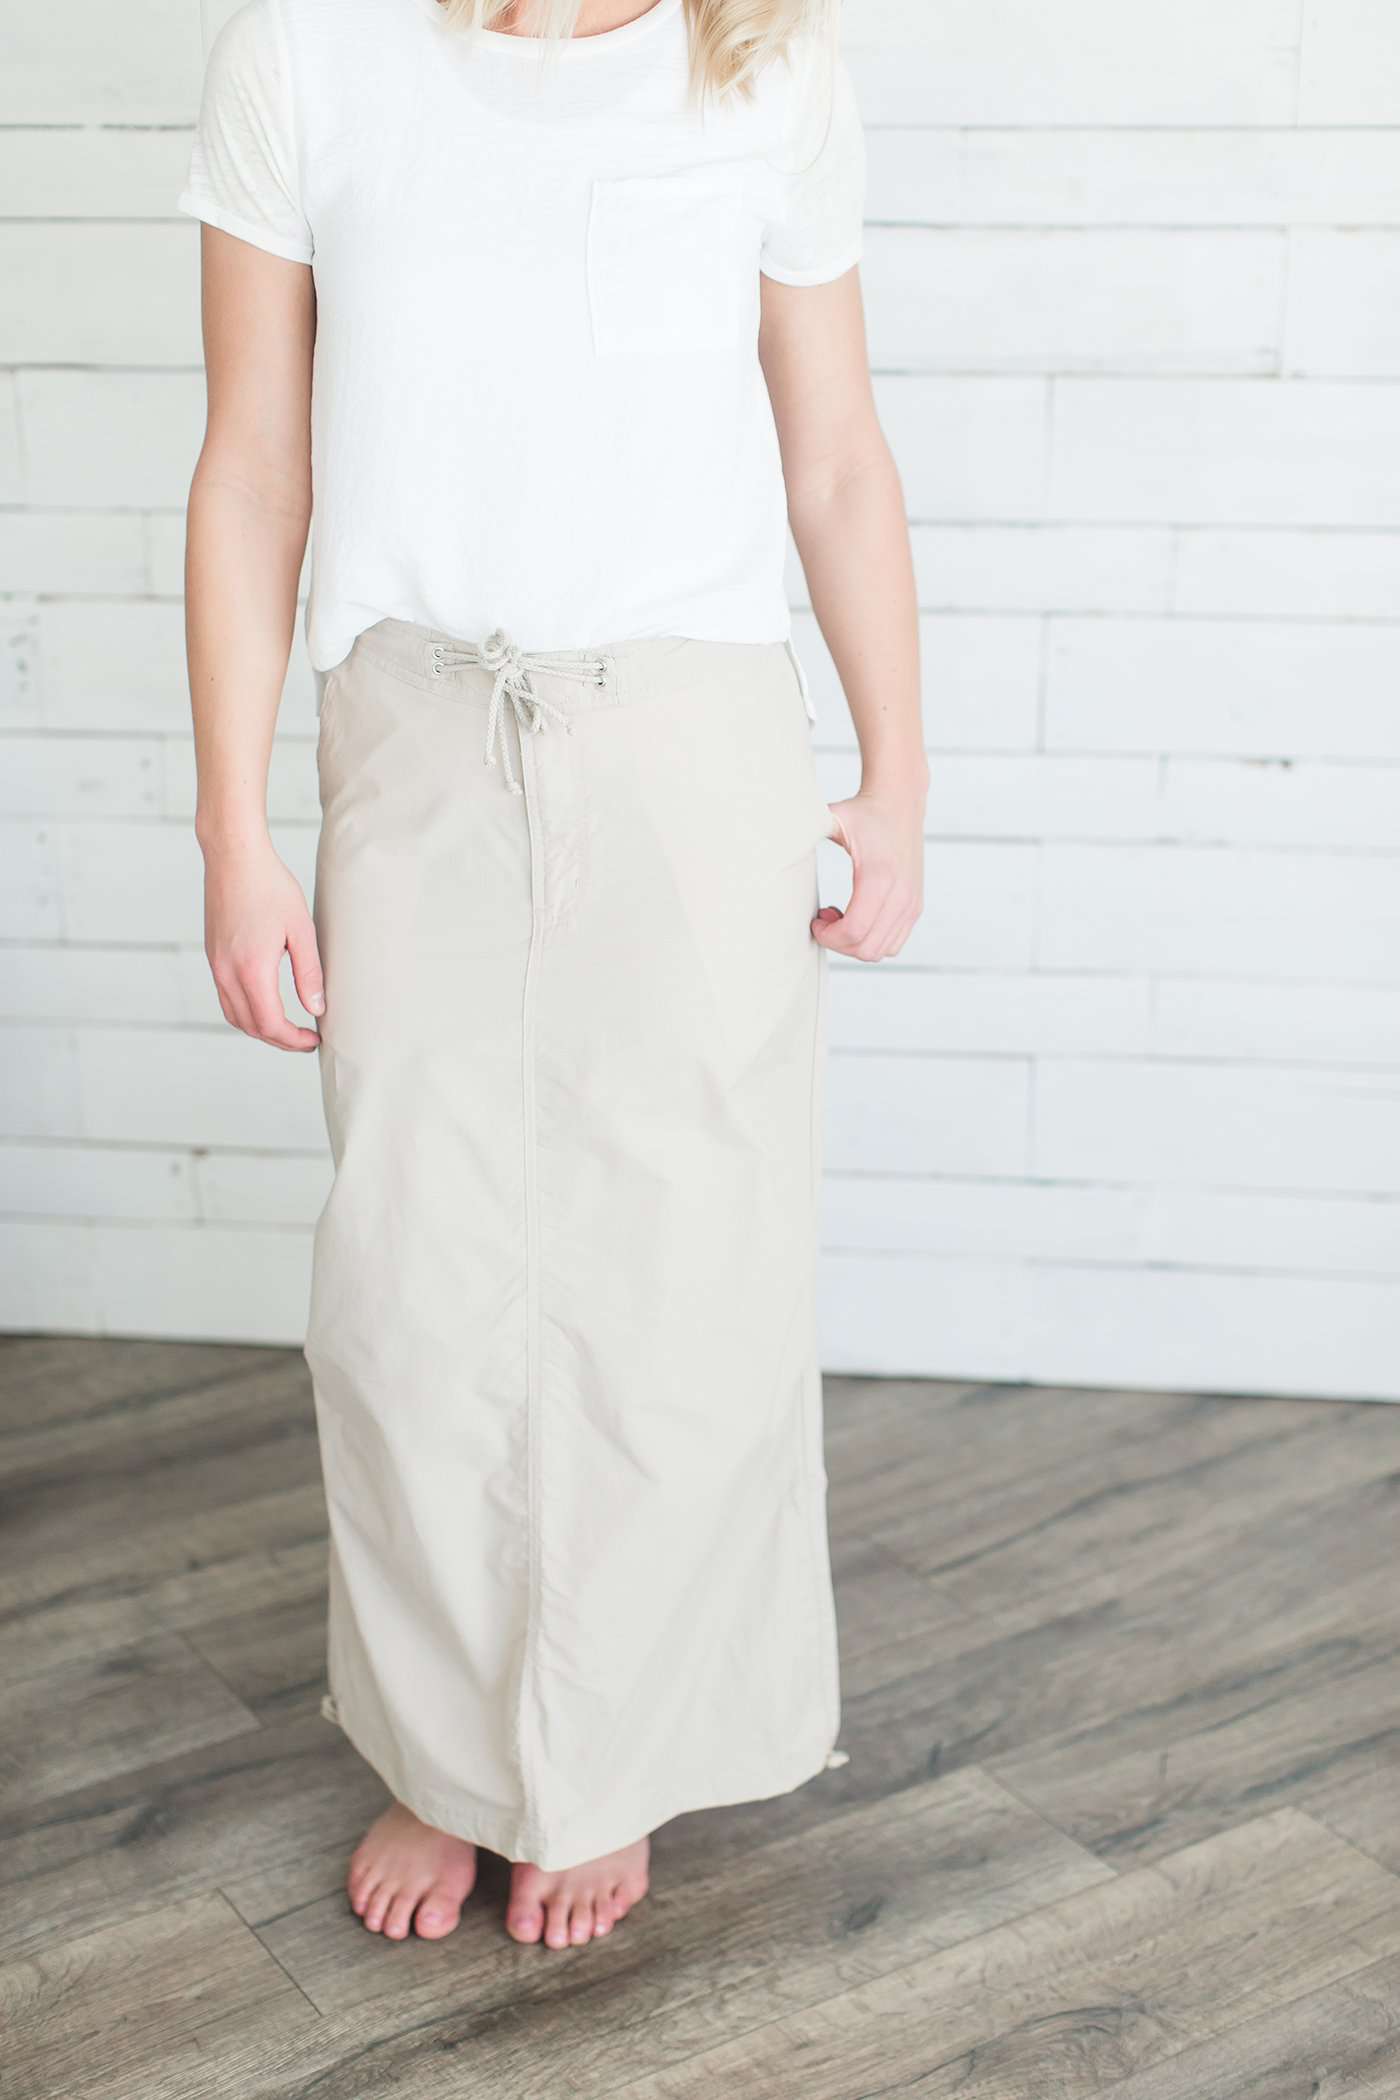 Black, tan or olive option in this long skirt with drawstring waist and side strings to adjust height from midi to maxi